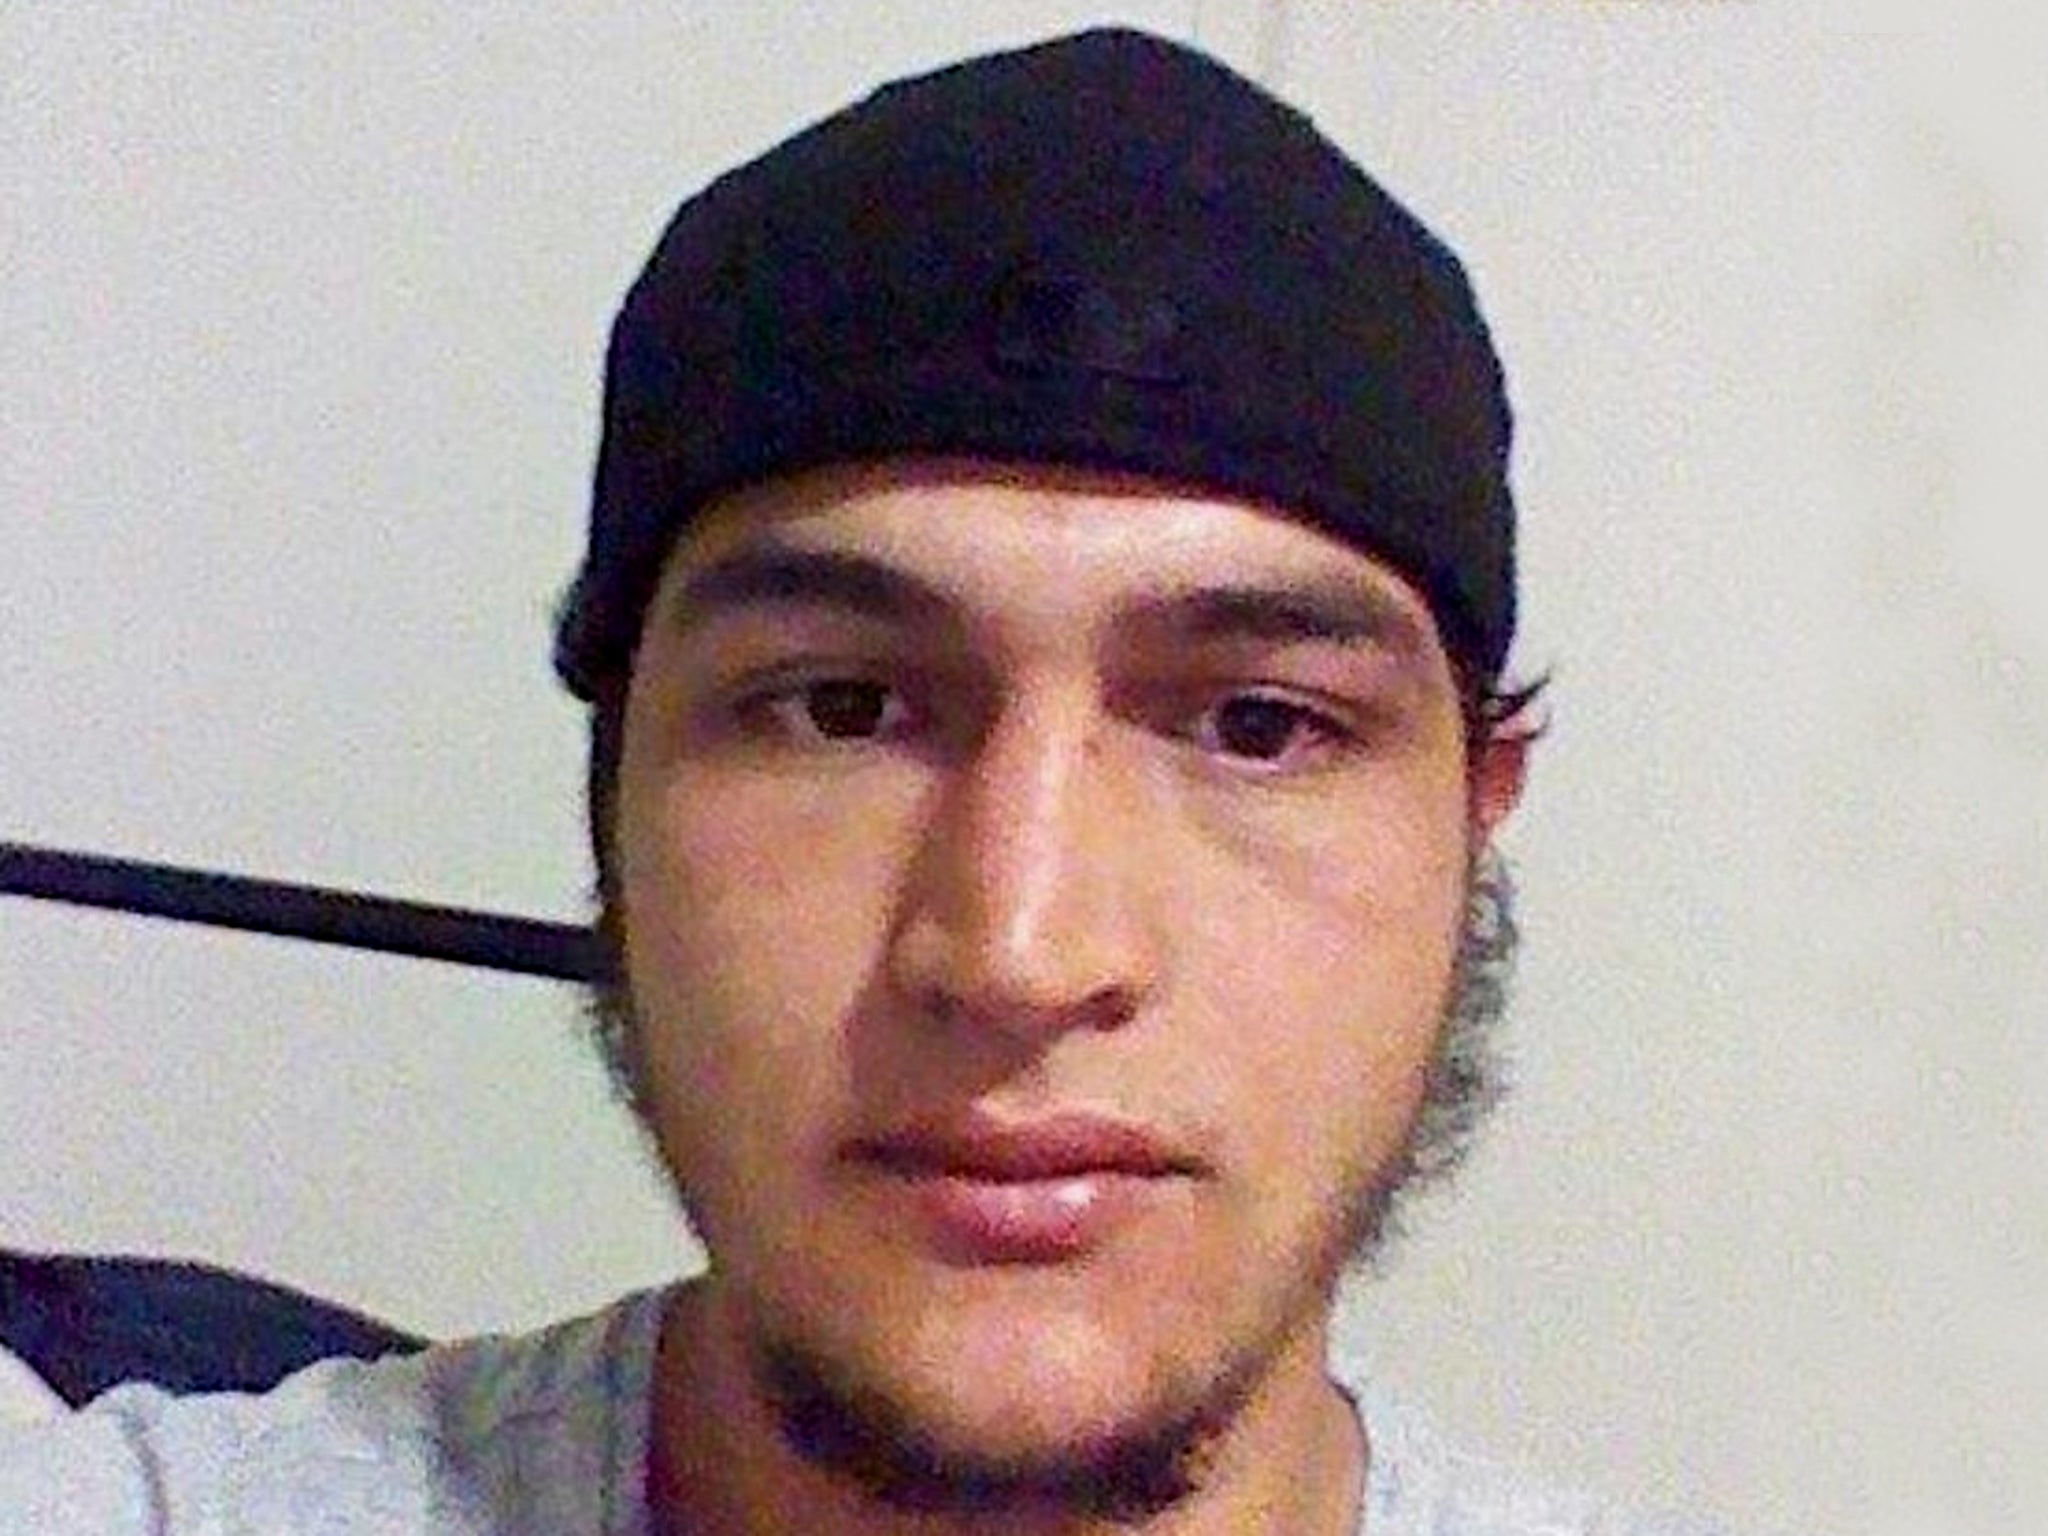 Anis Amri travelled 1,000 miles across Europe from Berlin to Milan